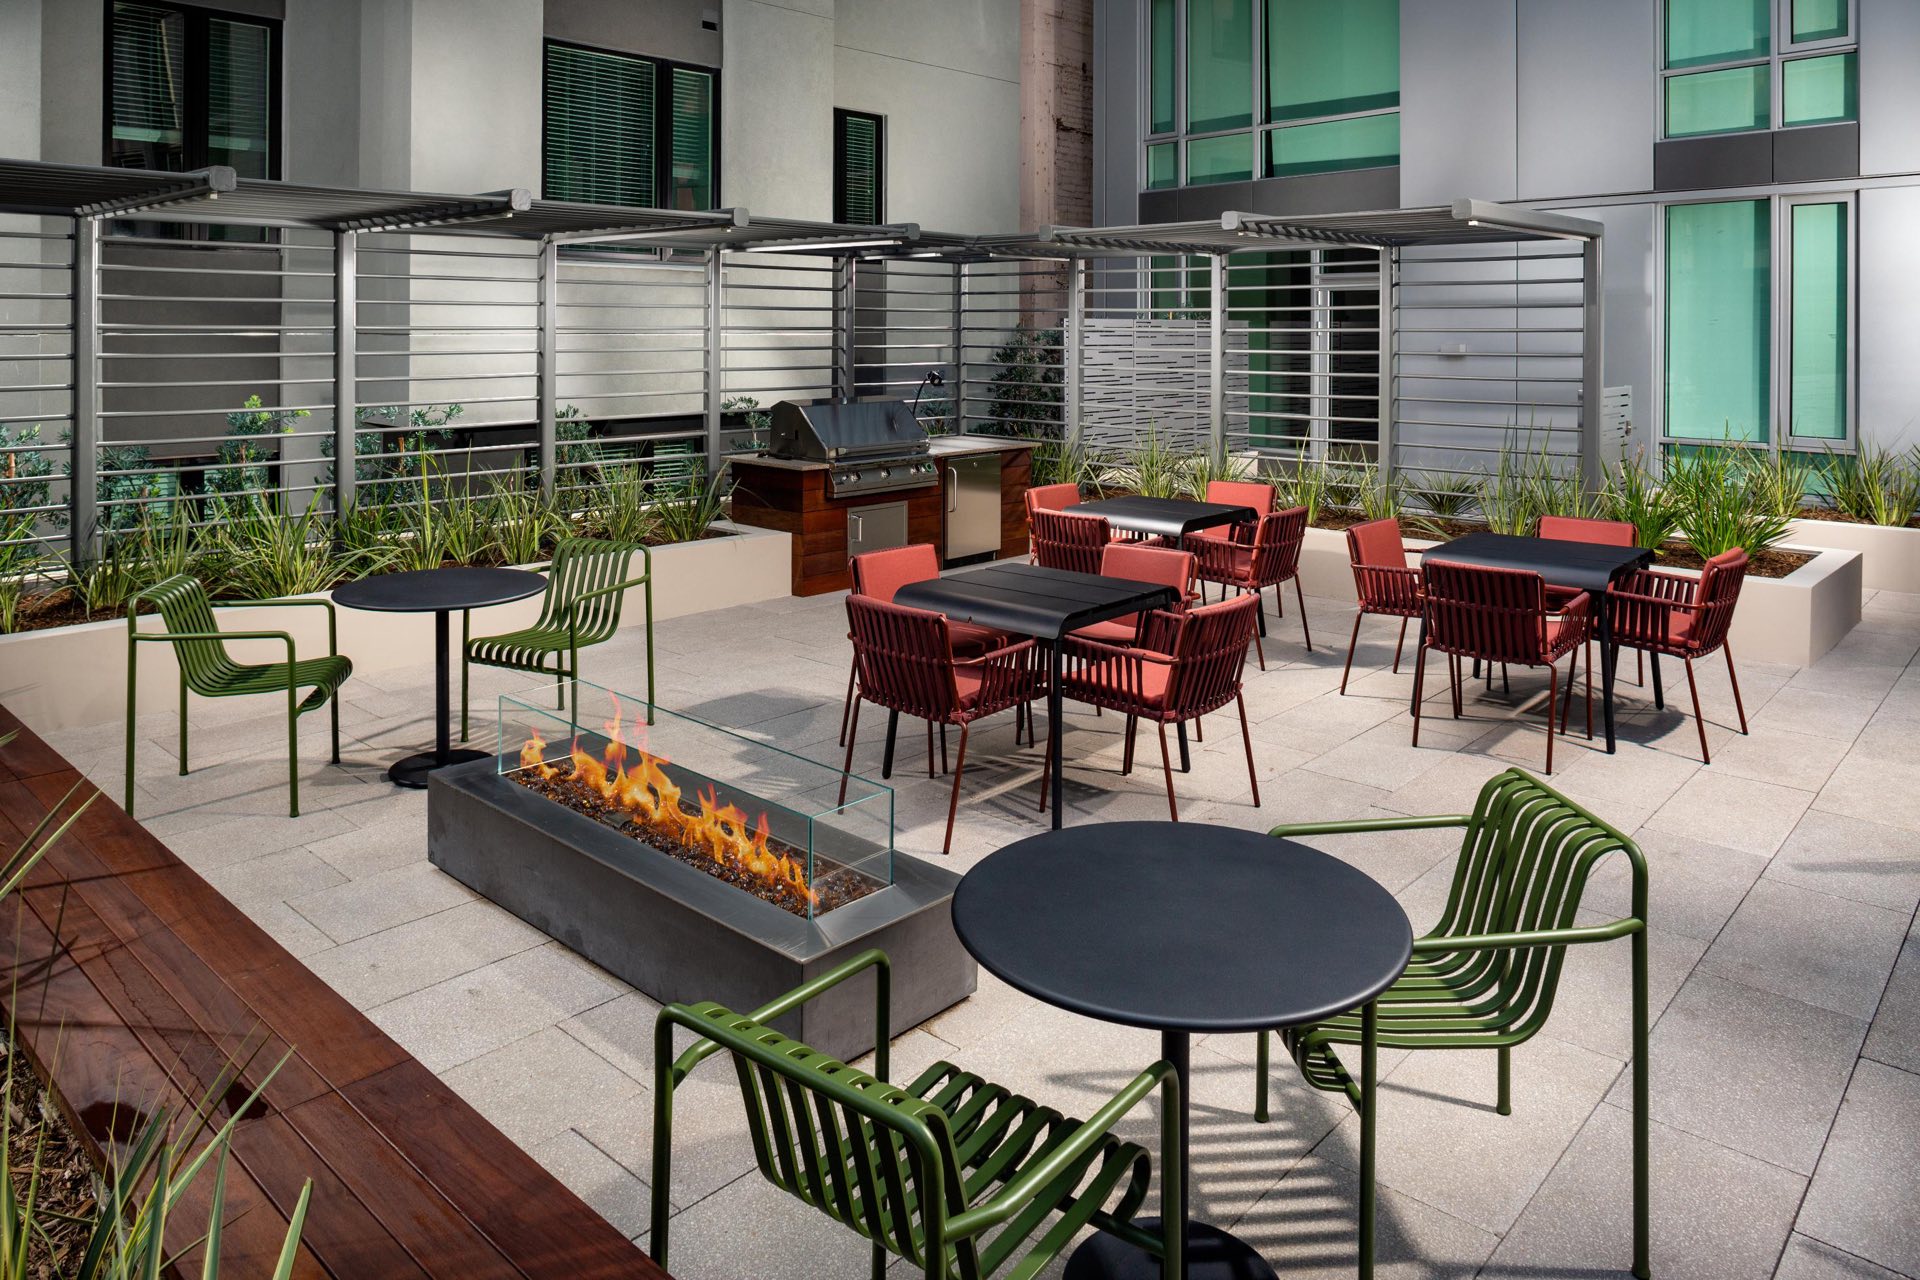 Patio with grill, tables, and firepit